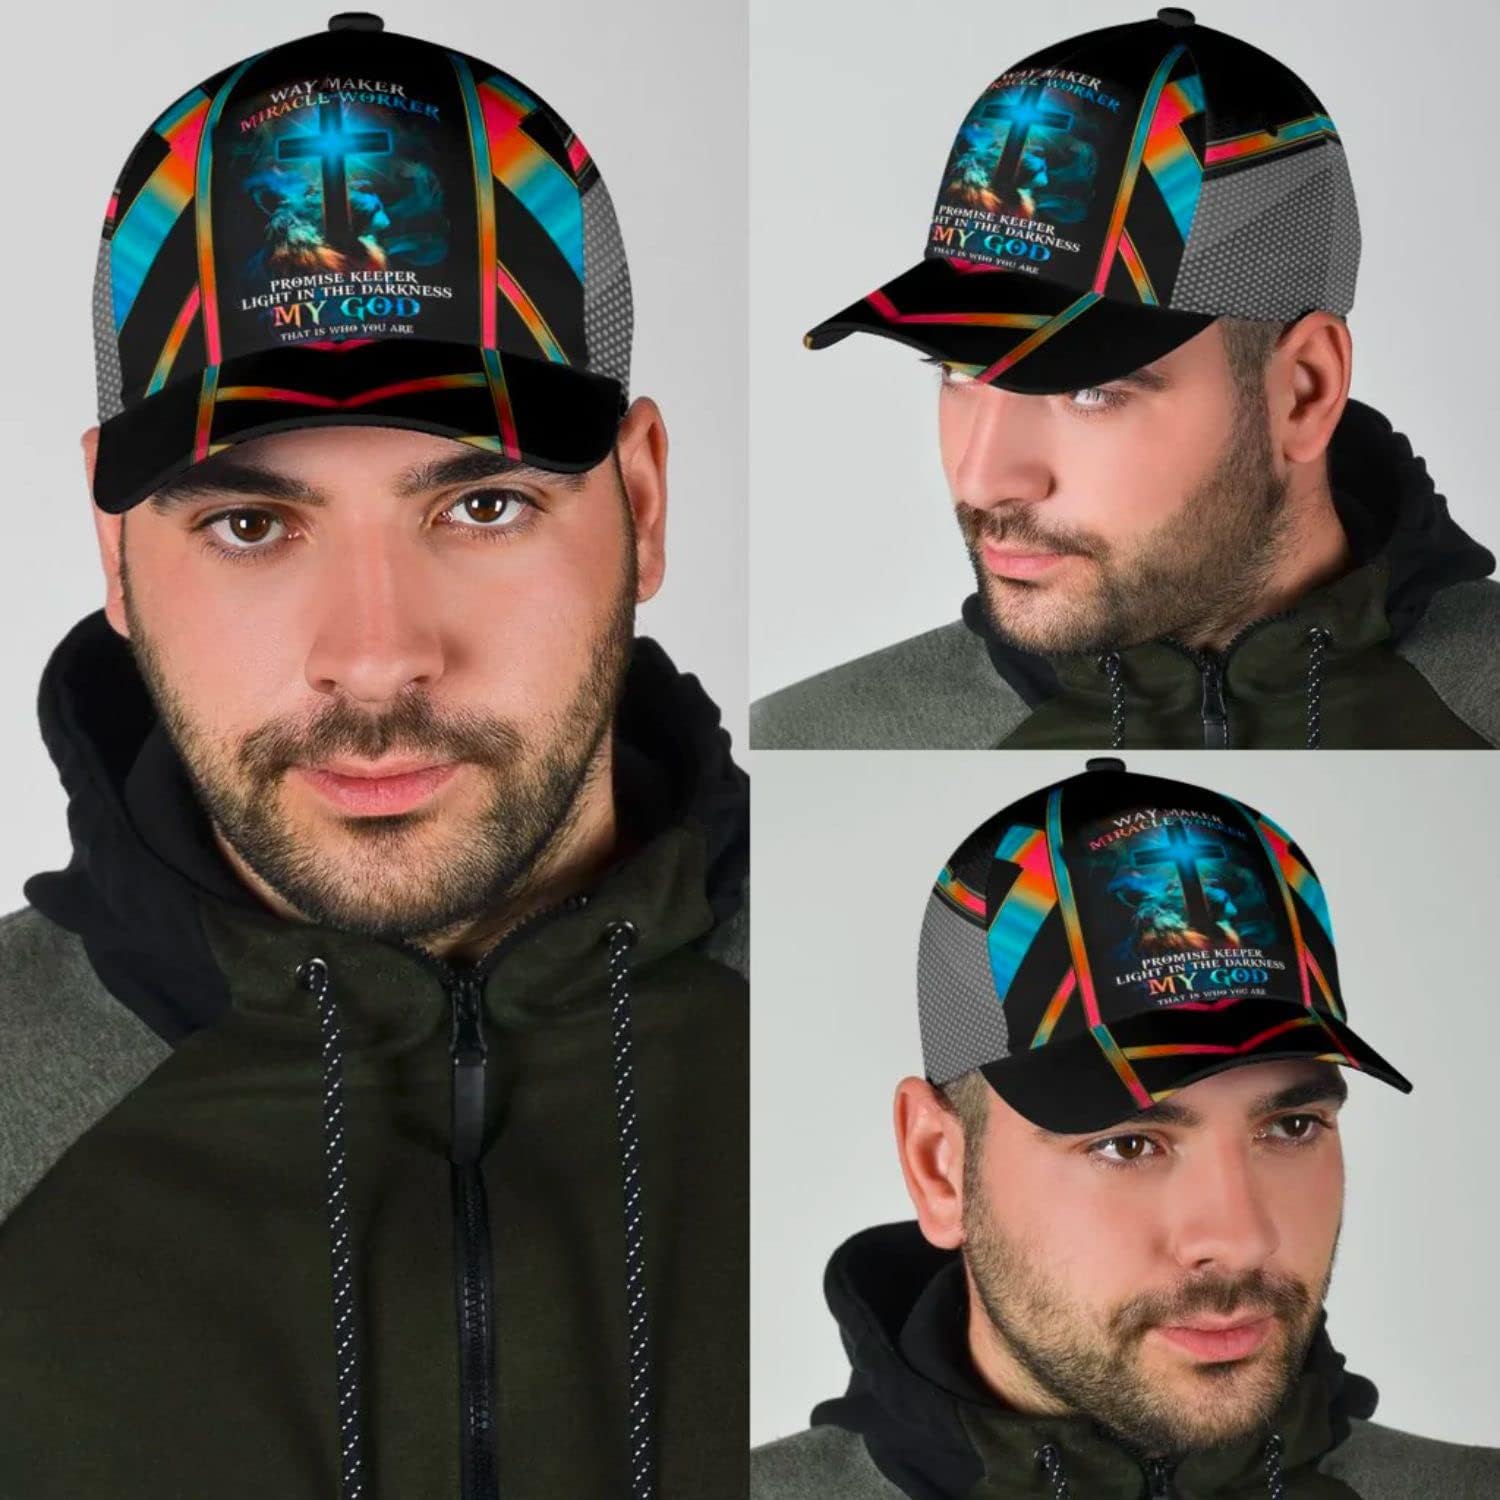 The Lion Cross Light Way Maker Miracle Worker Promise Keeper Classic Hat All Over Print - Christian Hats for Men and Women